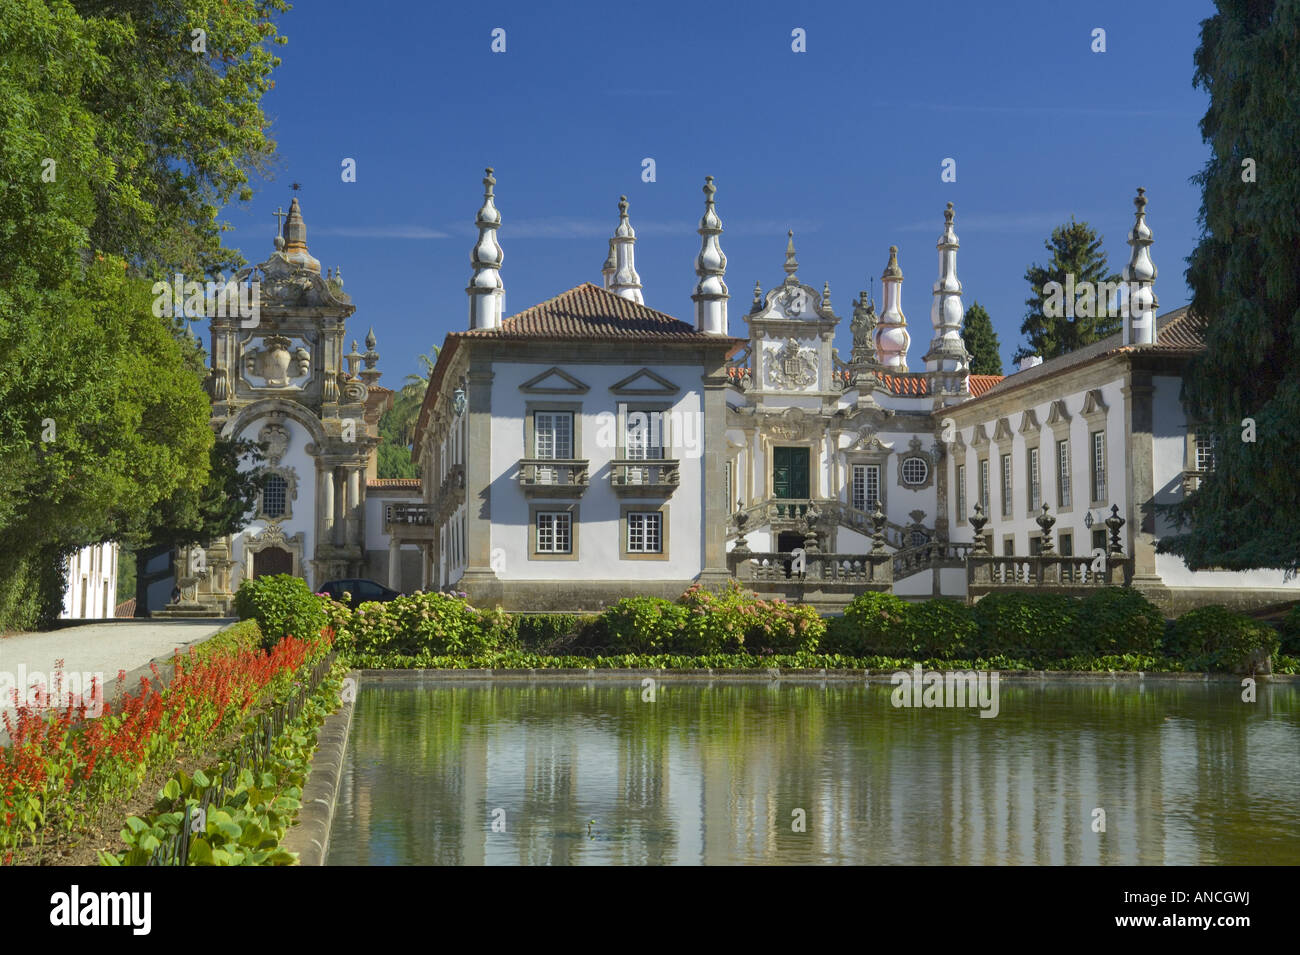 North Portugal Tras os Montes district Mateus Palace example of Baroque architecture Stock Photo